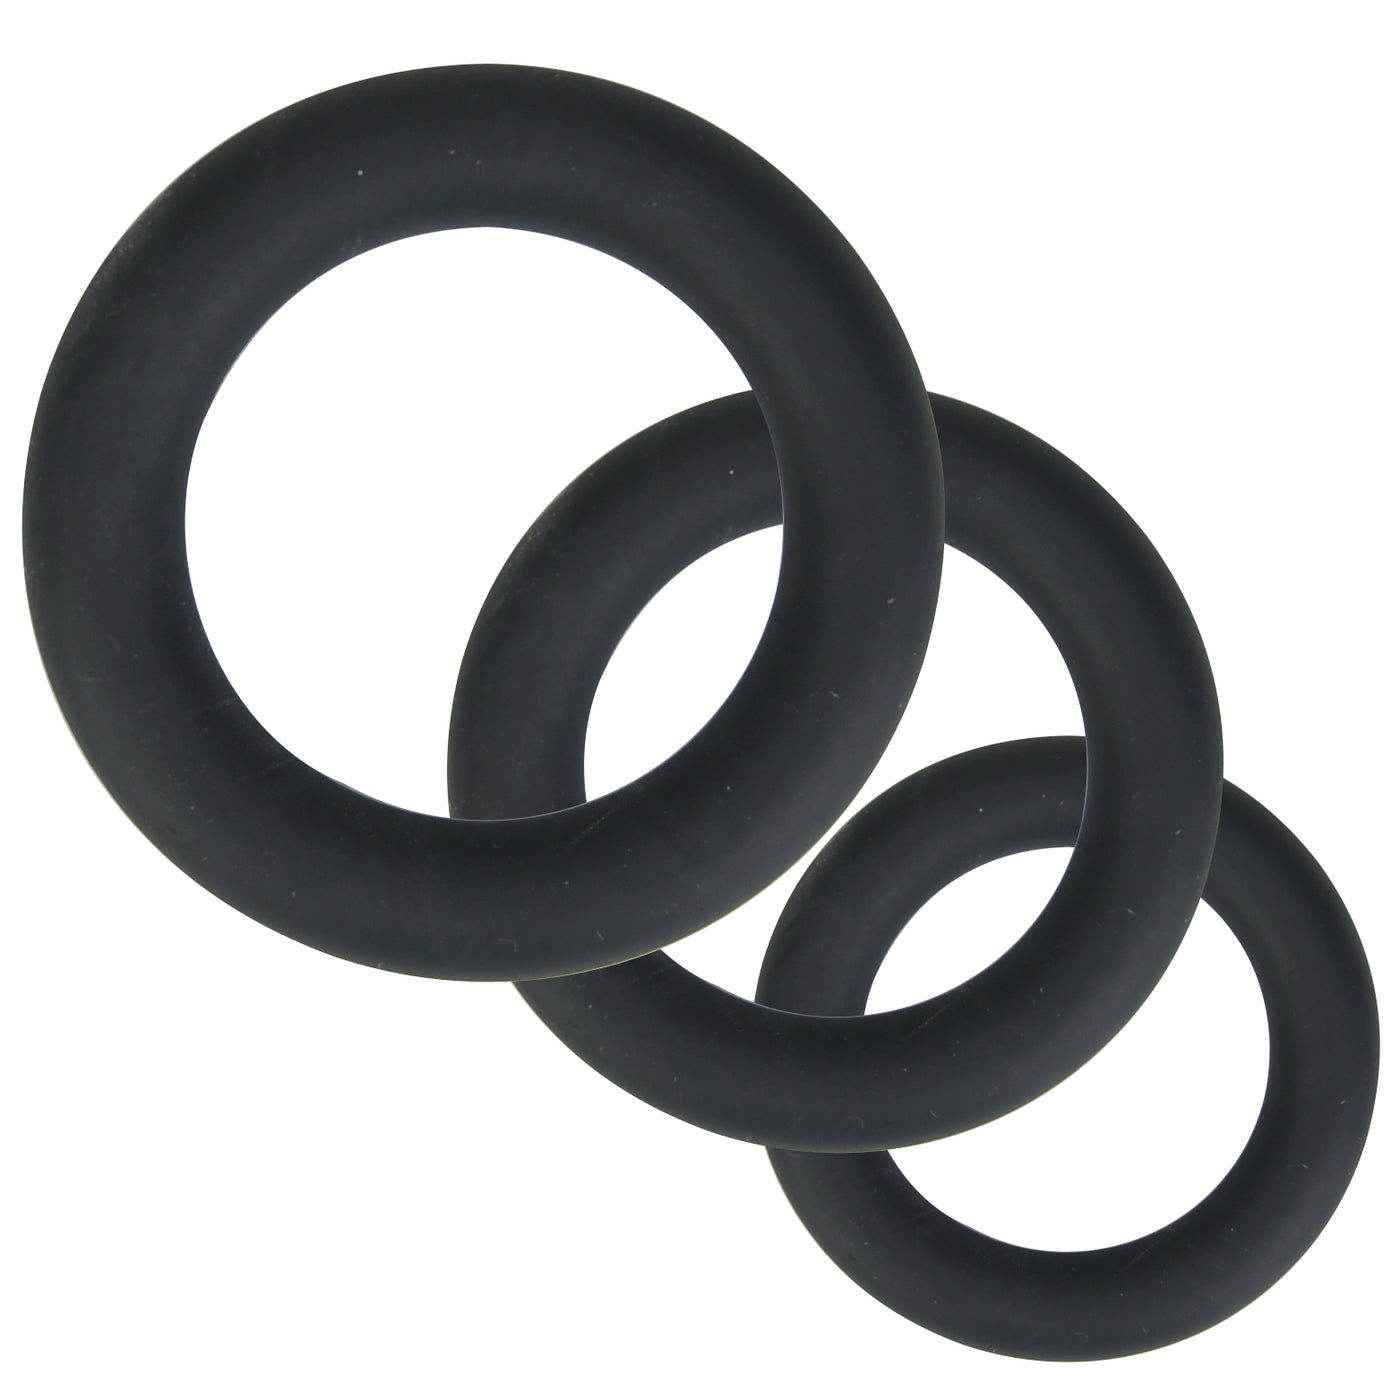 Loving Joy Thick Silicone Cock Rings 3 Pack - Grey